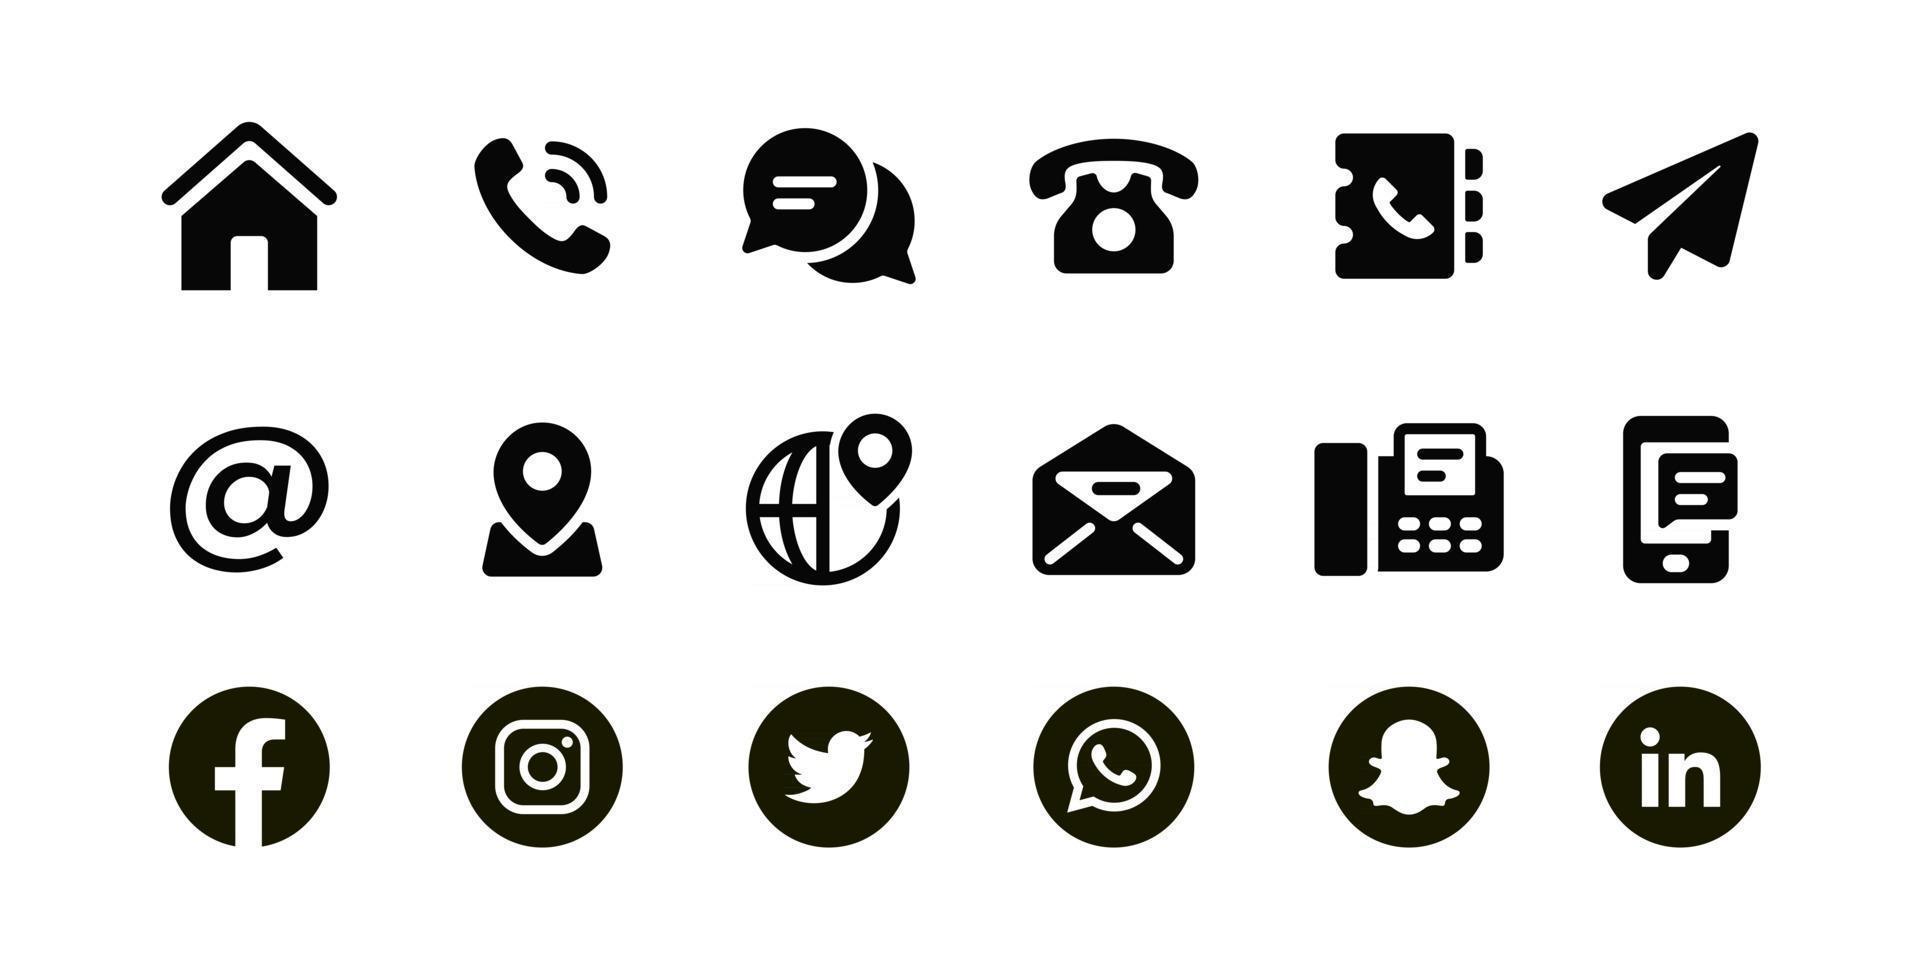 Personal Contact Icons Set vector